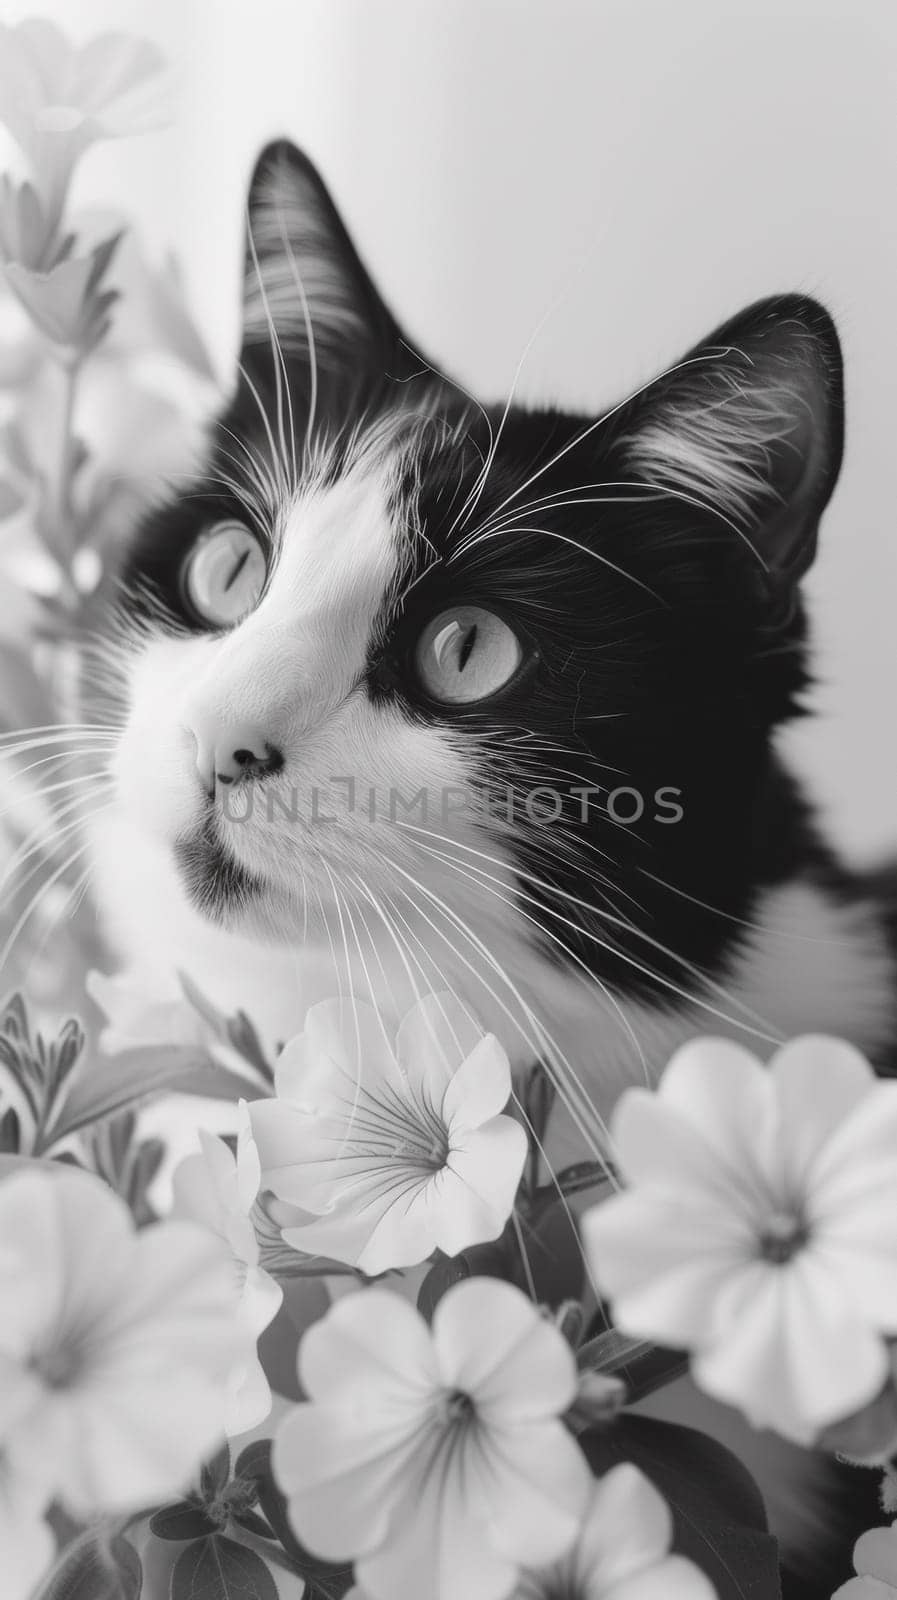 A black and white cat sitting in a bunch of flowers